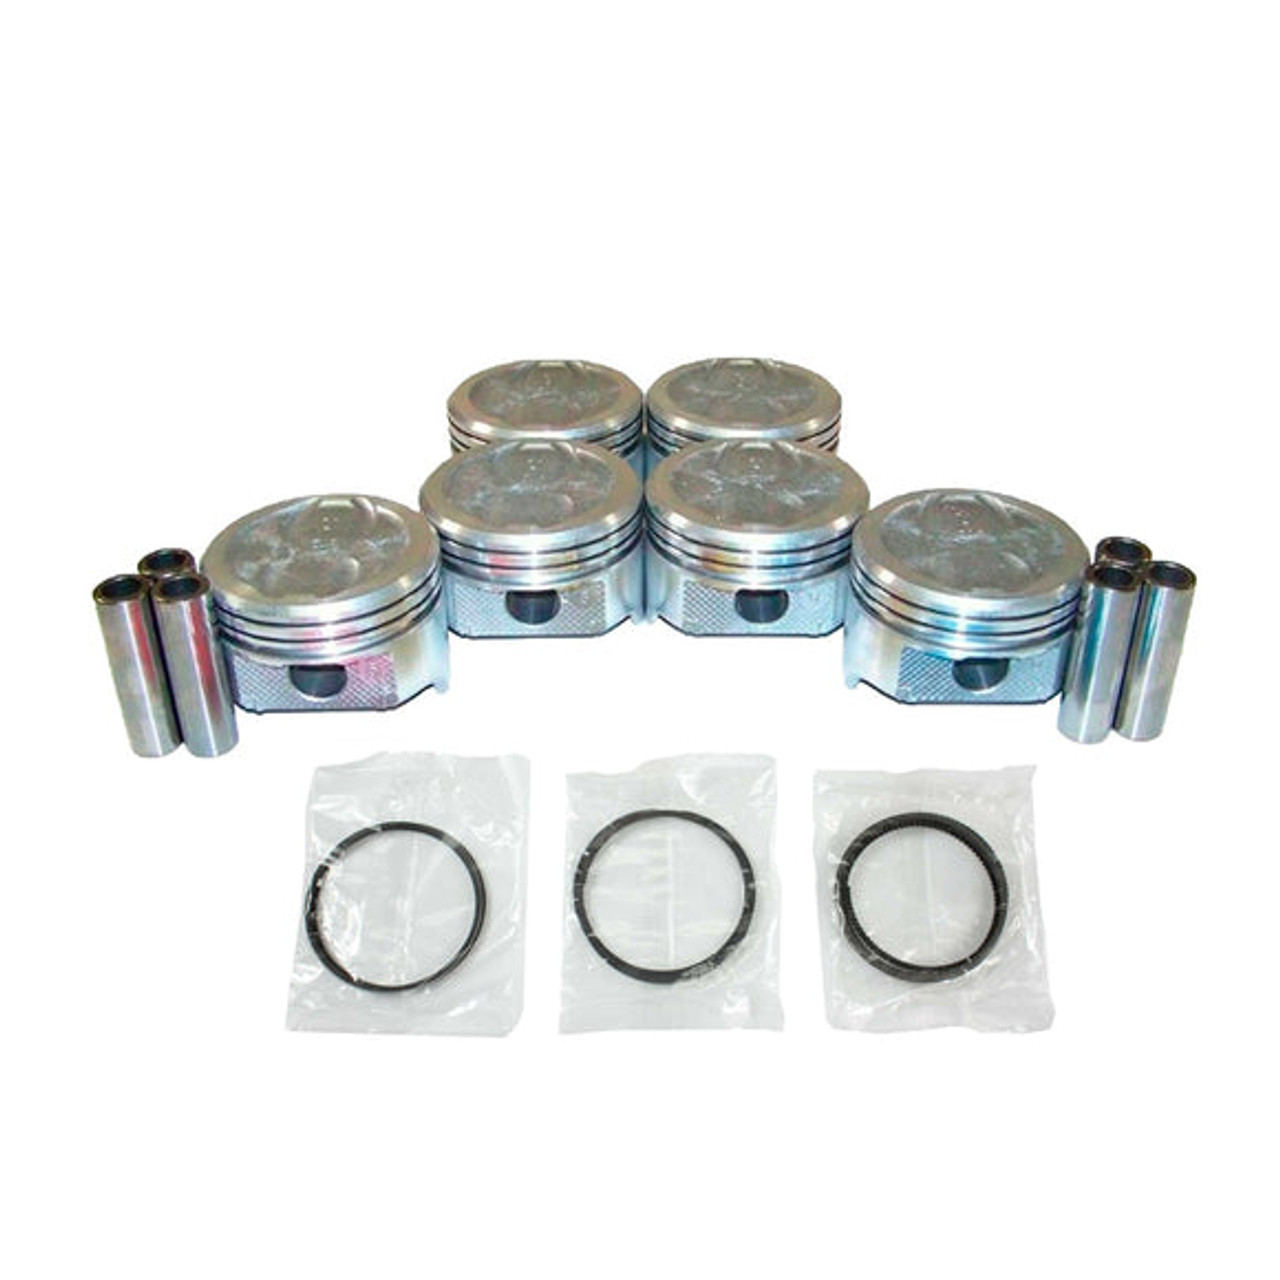 Piston Set with Rings - 1990 Chevrolet Astro 4.3L Engine Parts # PRK3125ZE7